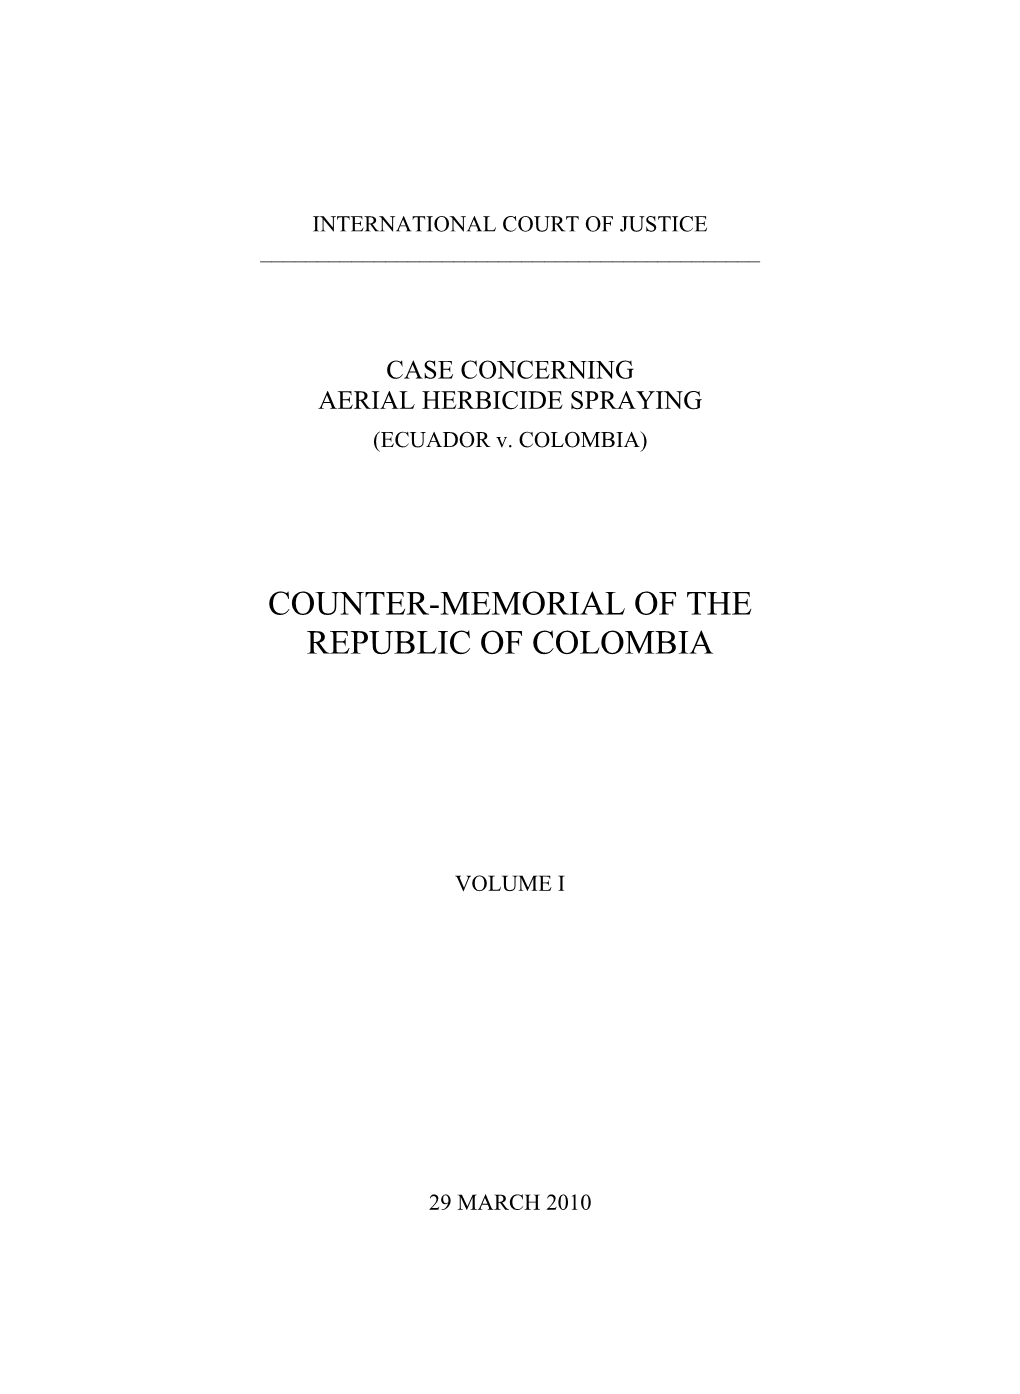 Counter-Memorial of the Republic of Colombia